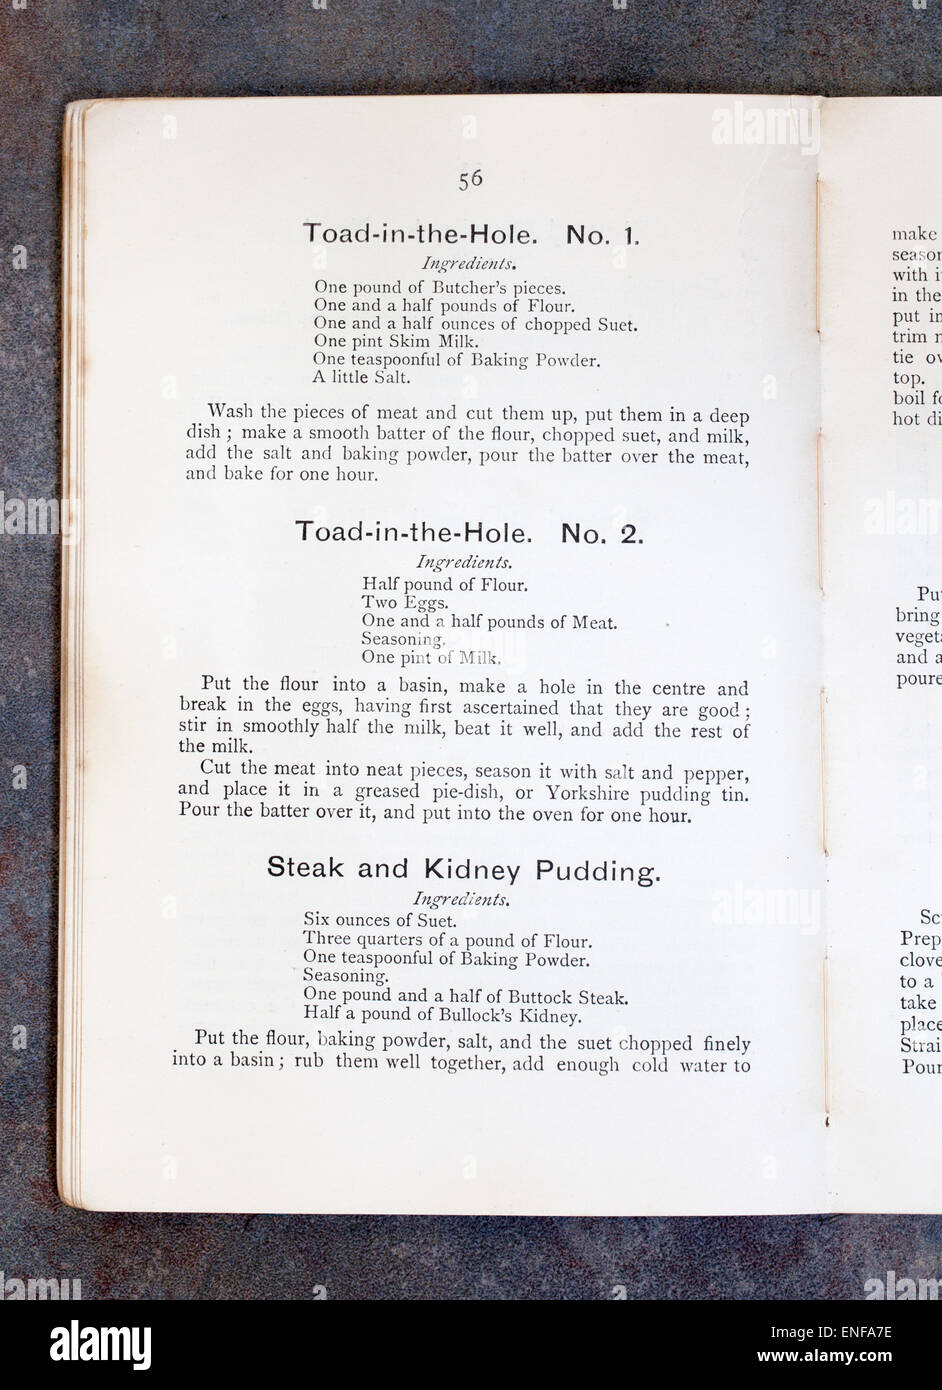 Toad in the Hole Recipes from Plain Cookery Recipes Book by Mrs Charles Clarke for the National Training School for Cookery Stock Photo